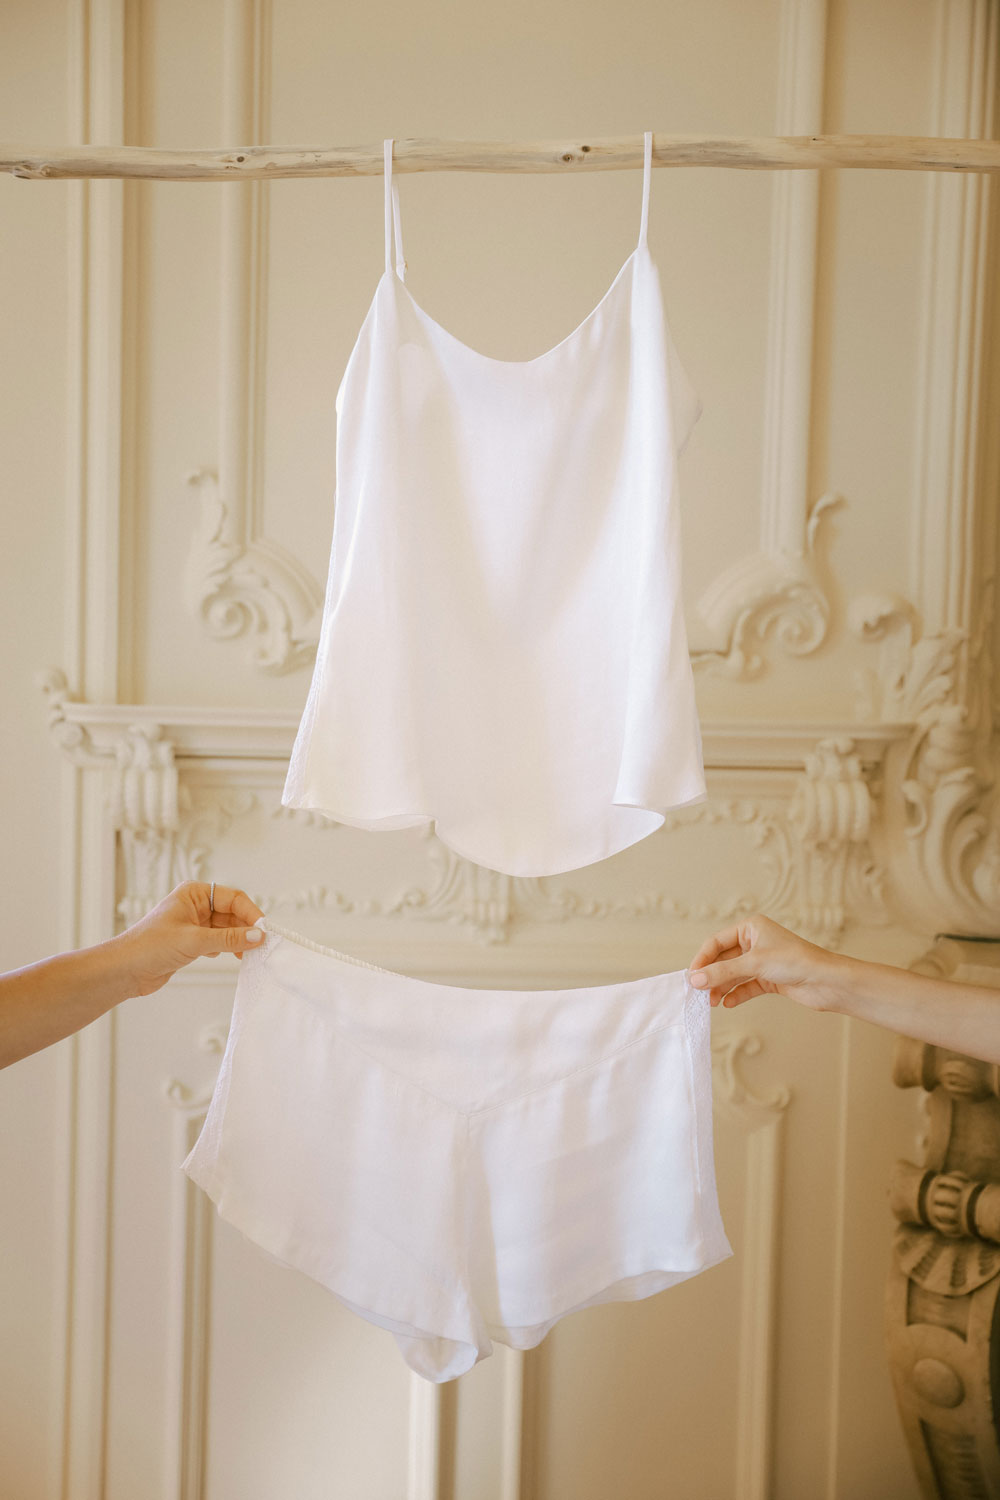 Leizi Camisole Pyjama Set seen from the front which consists in a white top and shorts pyjama  made with silk from orange peel.